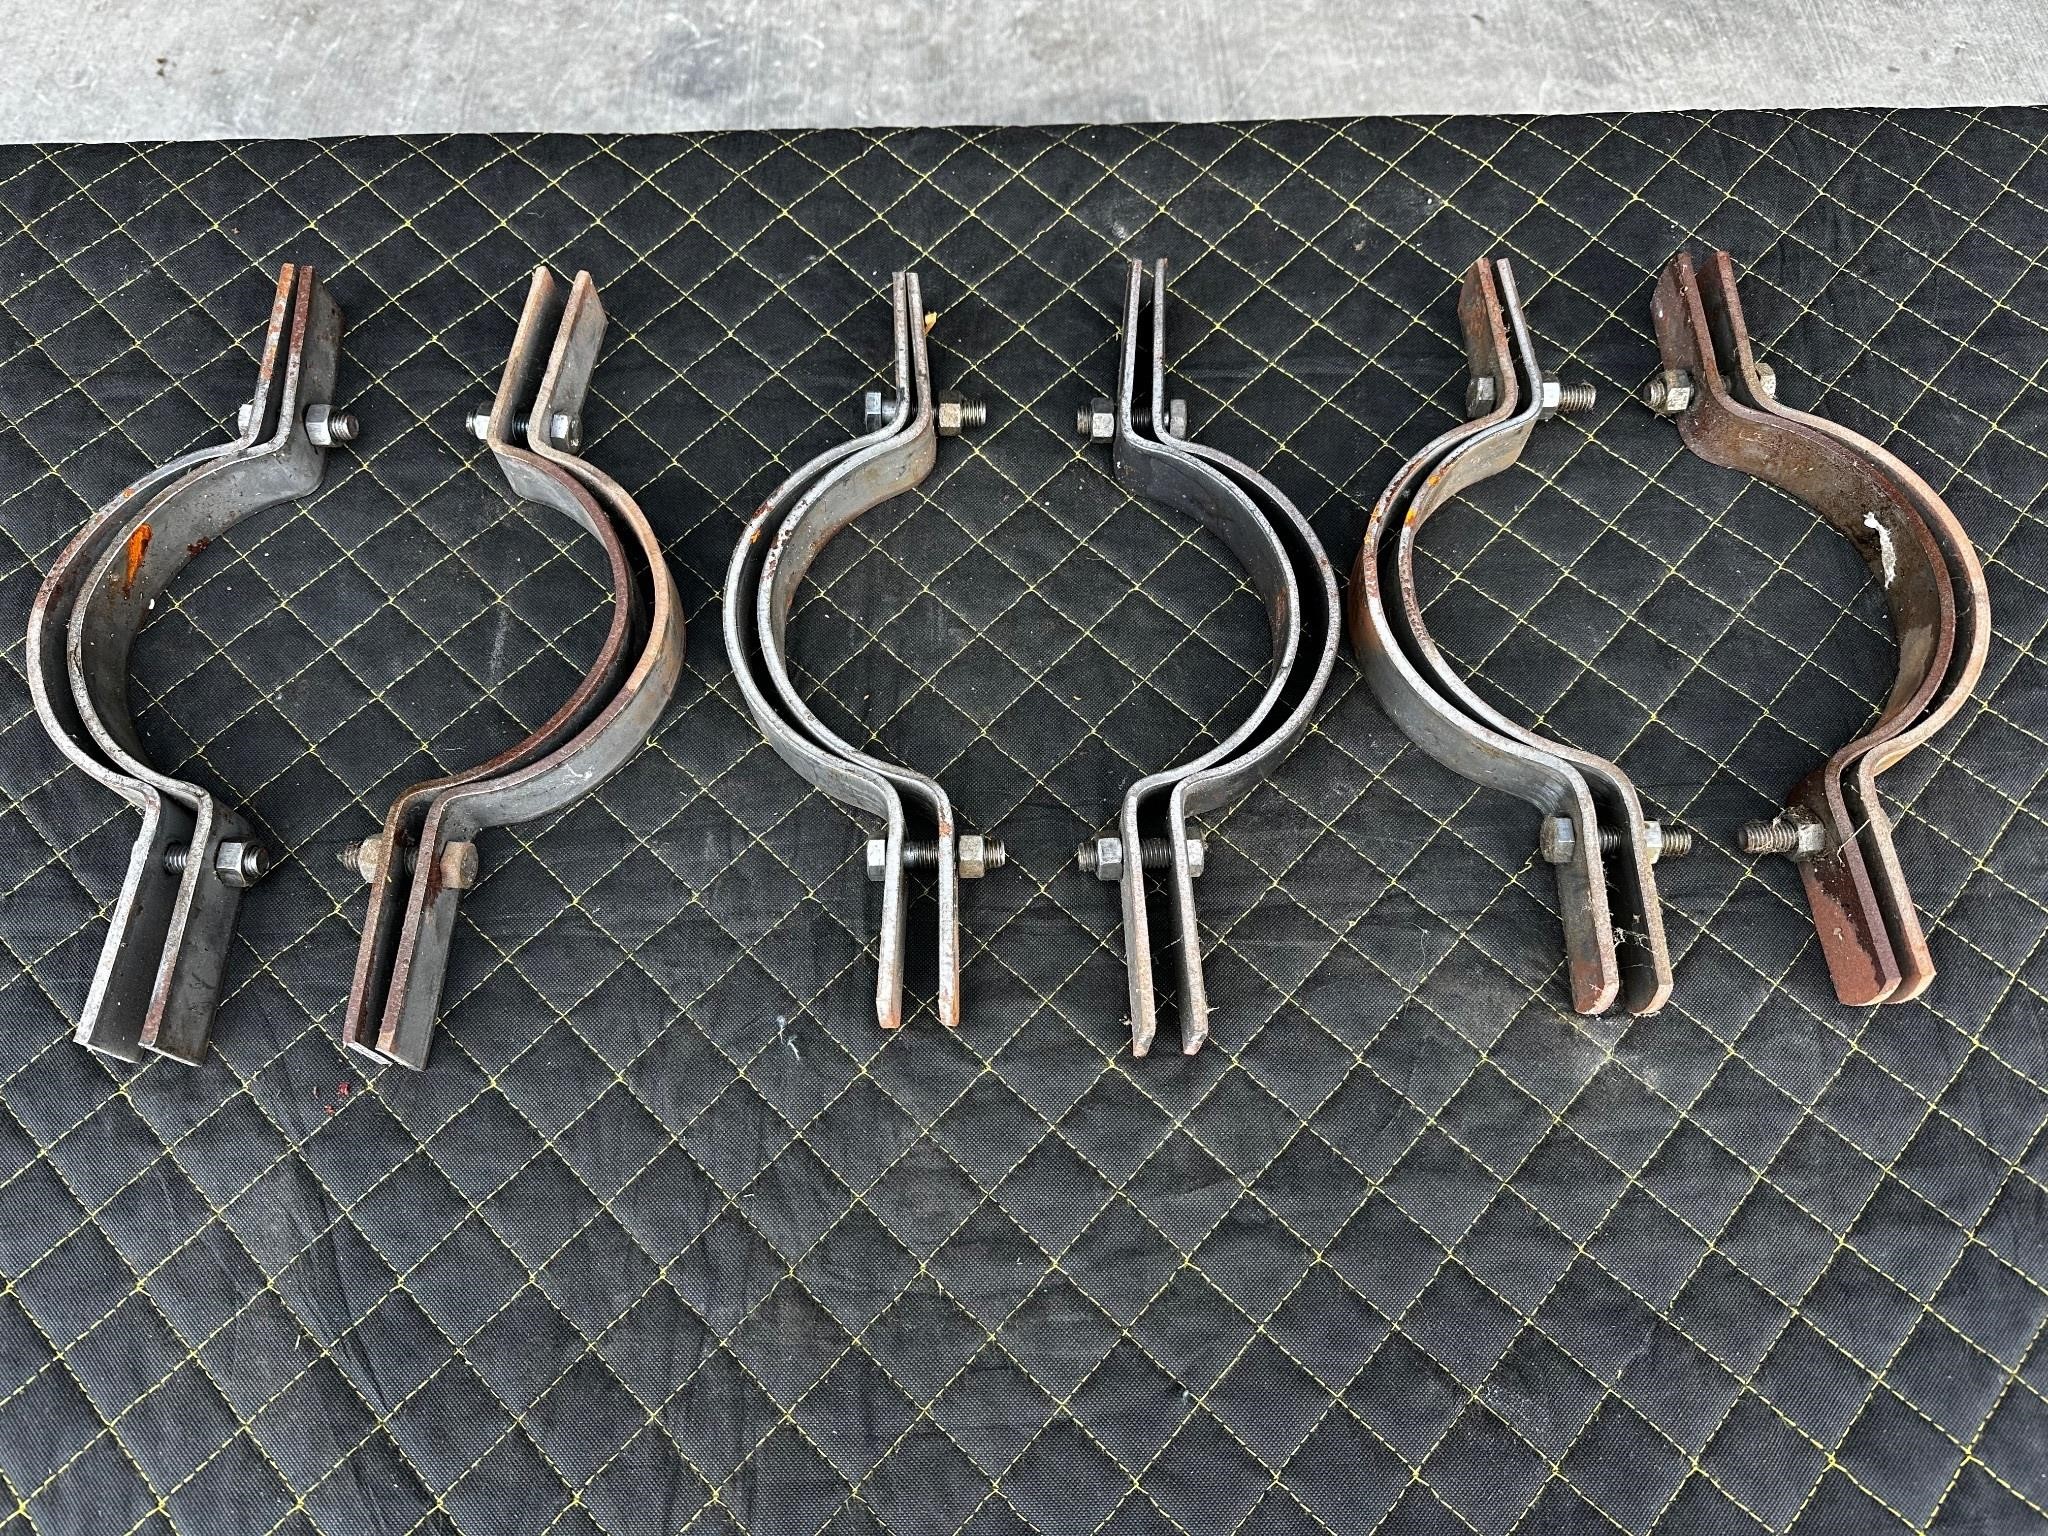 3 x Metal Pipe Clamps